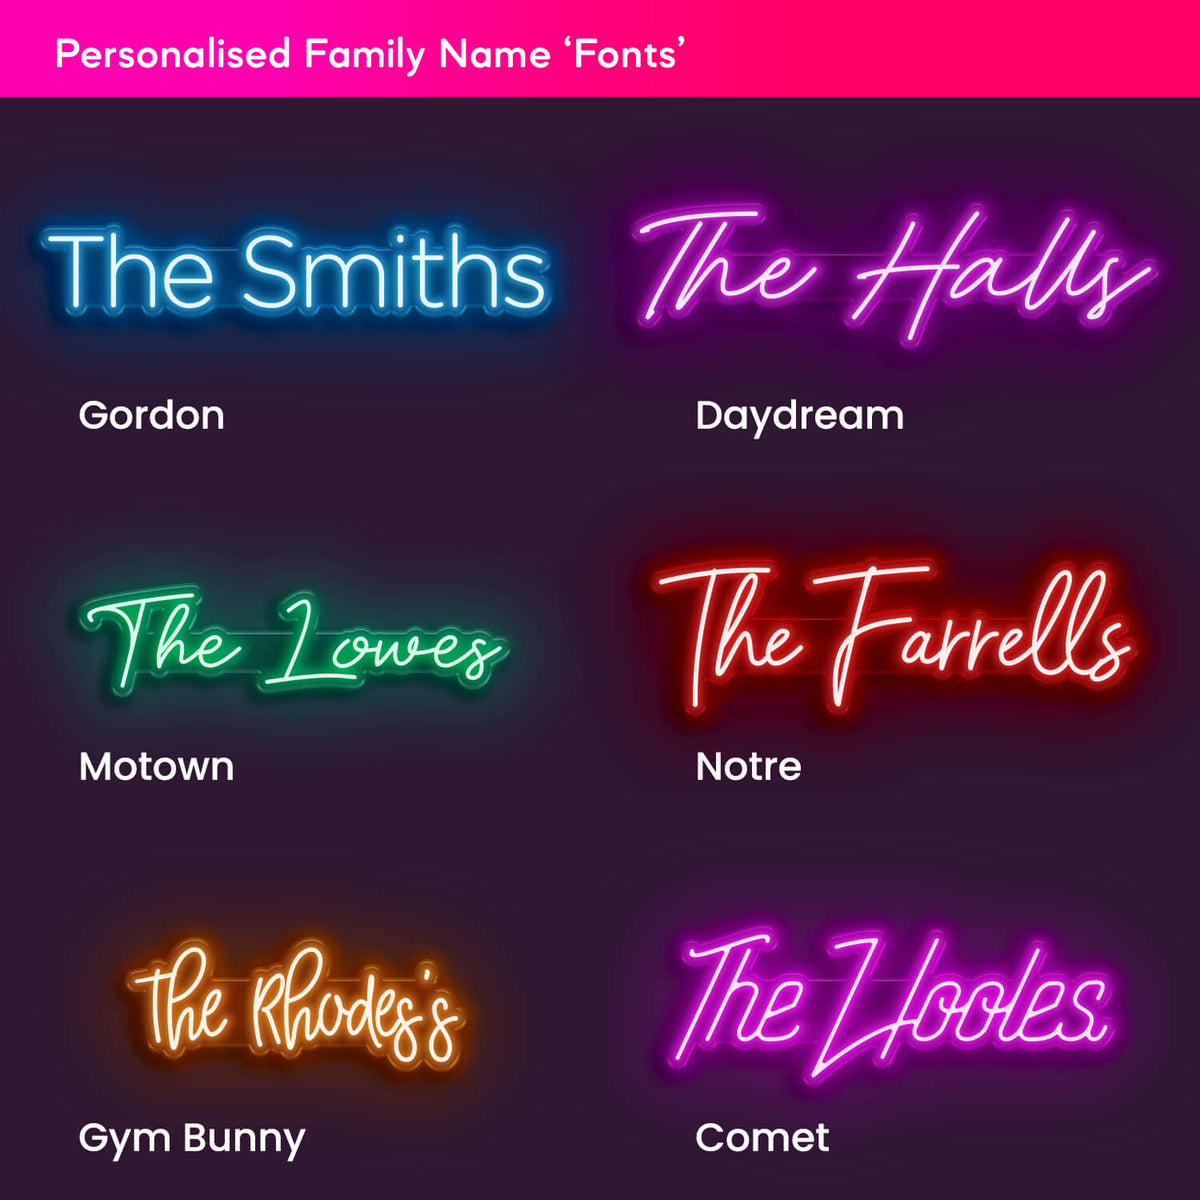 Personalised family name fonts